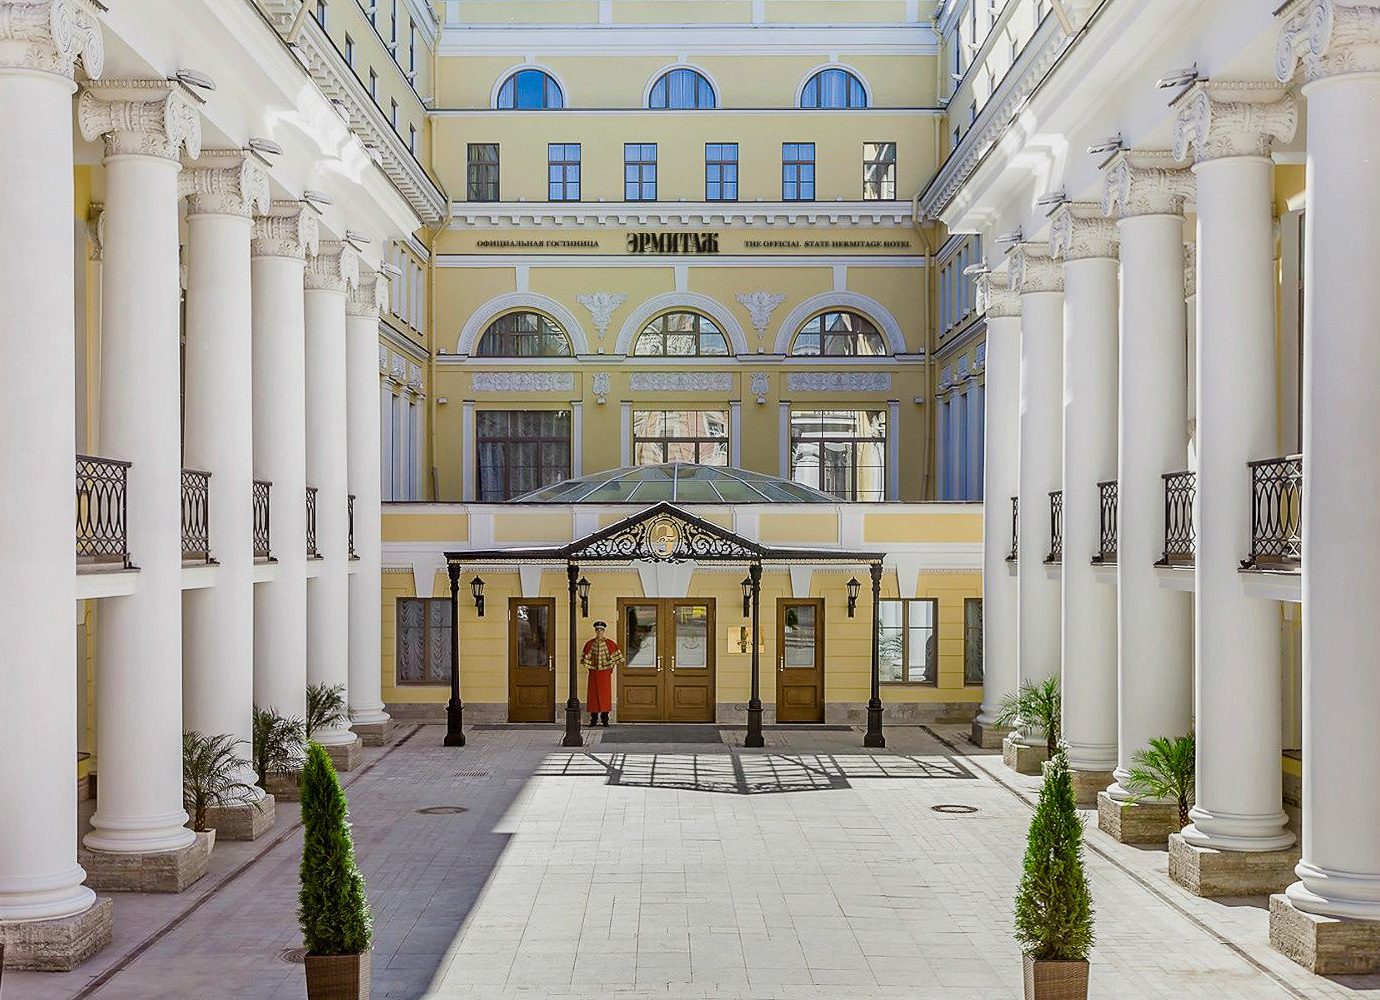 Arts + Culture Hotels Jetsetter Guides Luxury Travel property building classical architecture column structure Courtyard palace arcade mansion colonnade